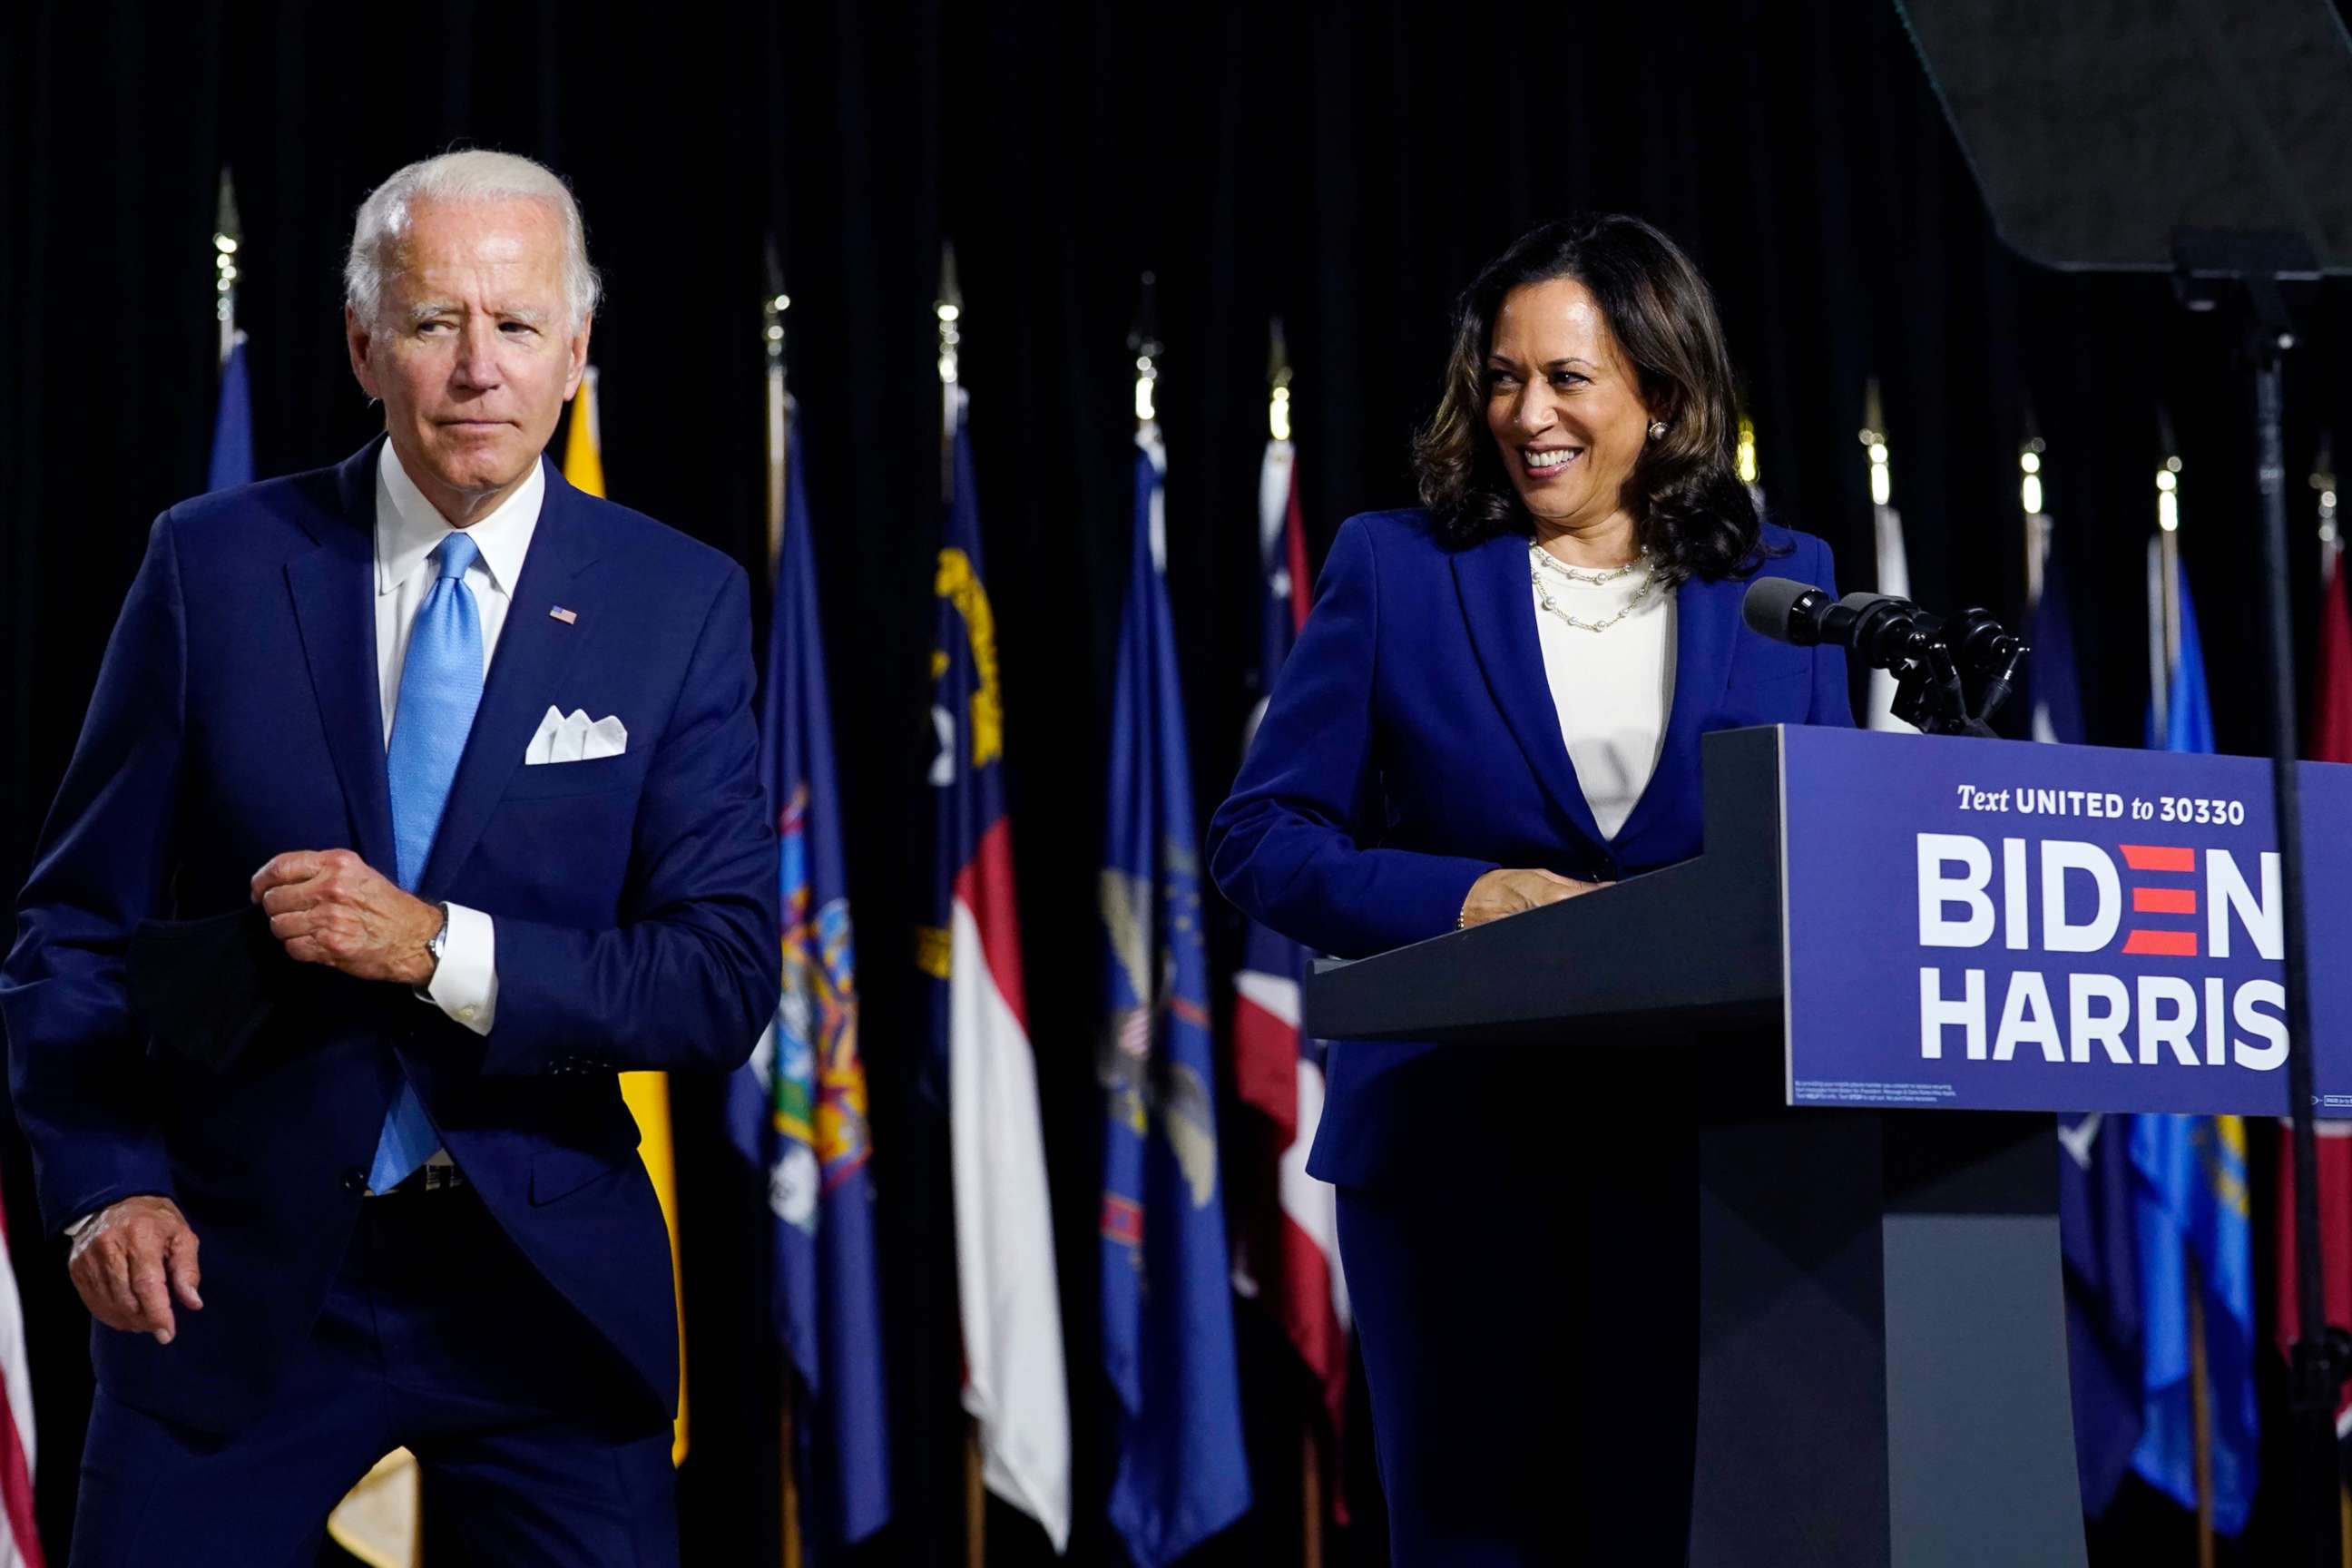 PHOTO: Democratic presidential candidate former Vice President Joe Biden retrieves his face mask from the podium before his running mate Sen. Kamala Harris speaks during a campaign event at Alexis Dupont High School in Wilmington, Del., Aug. 12, 2020.